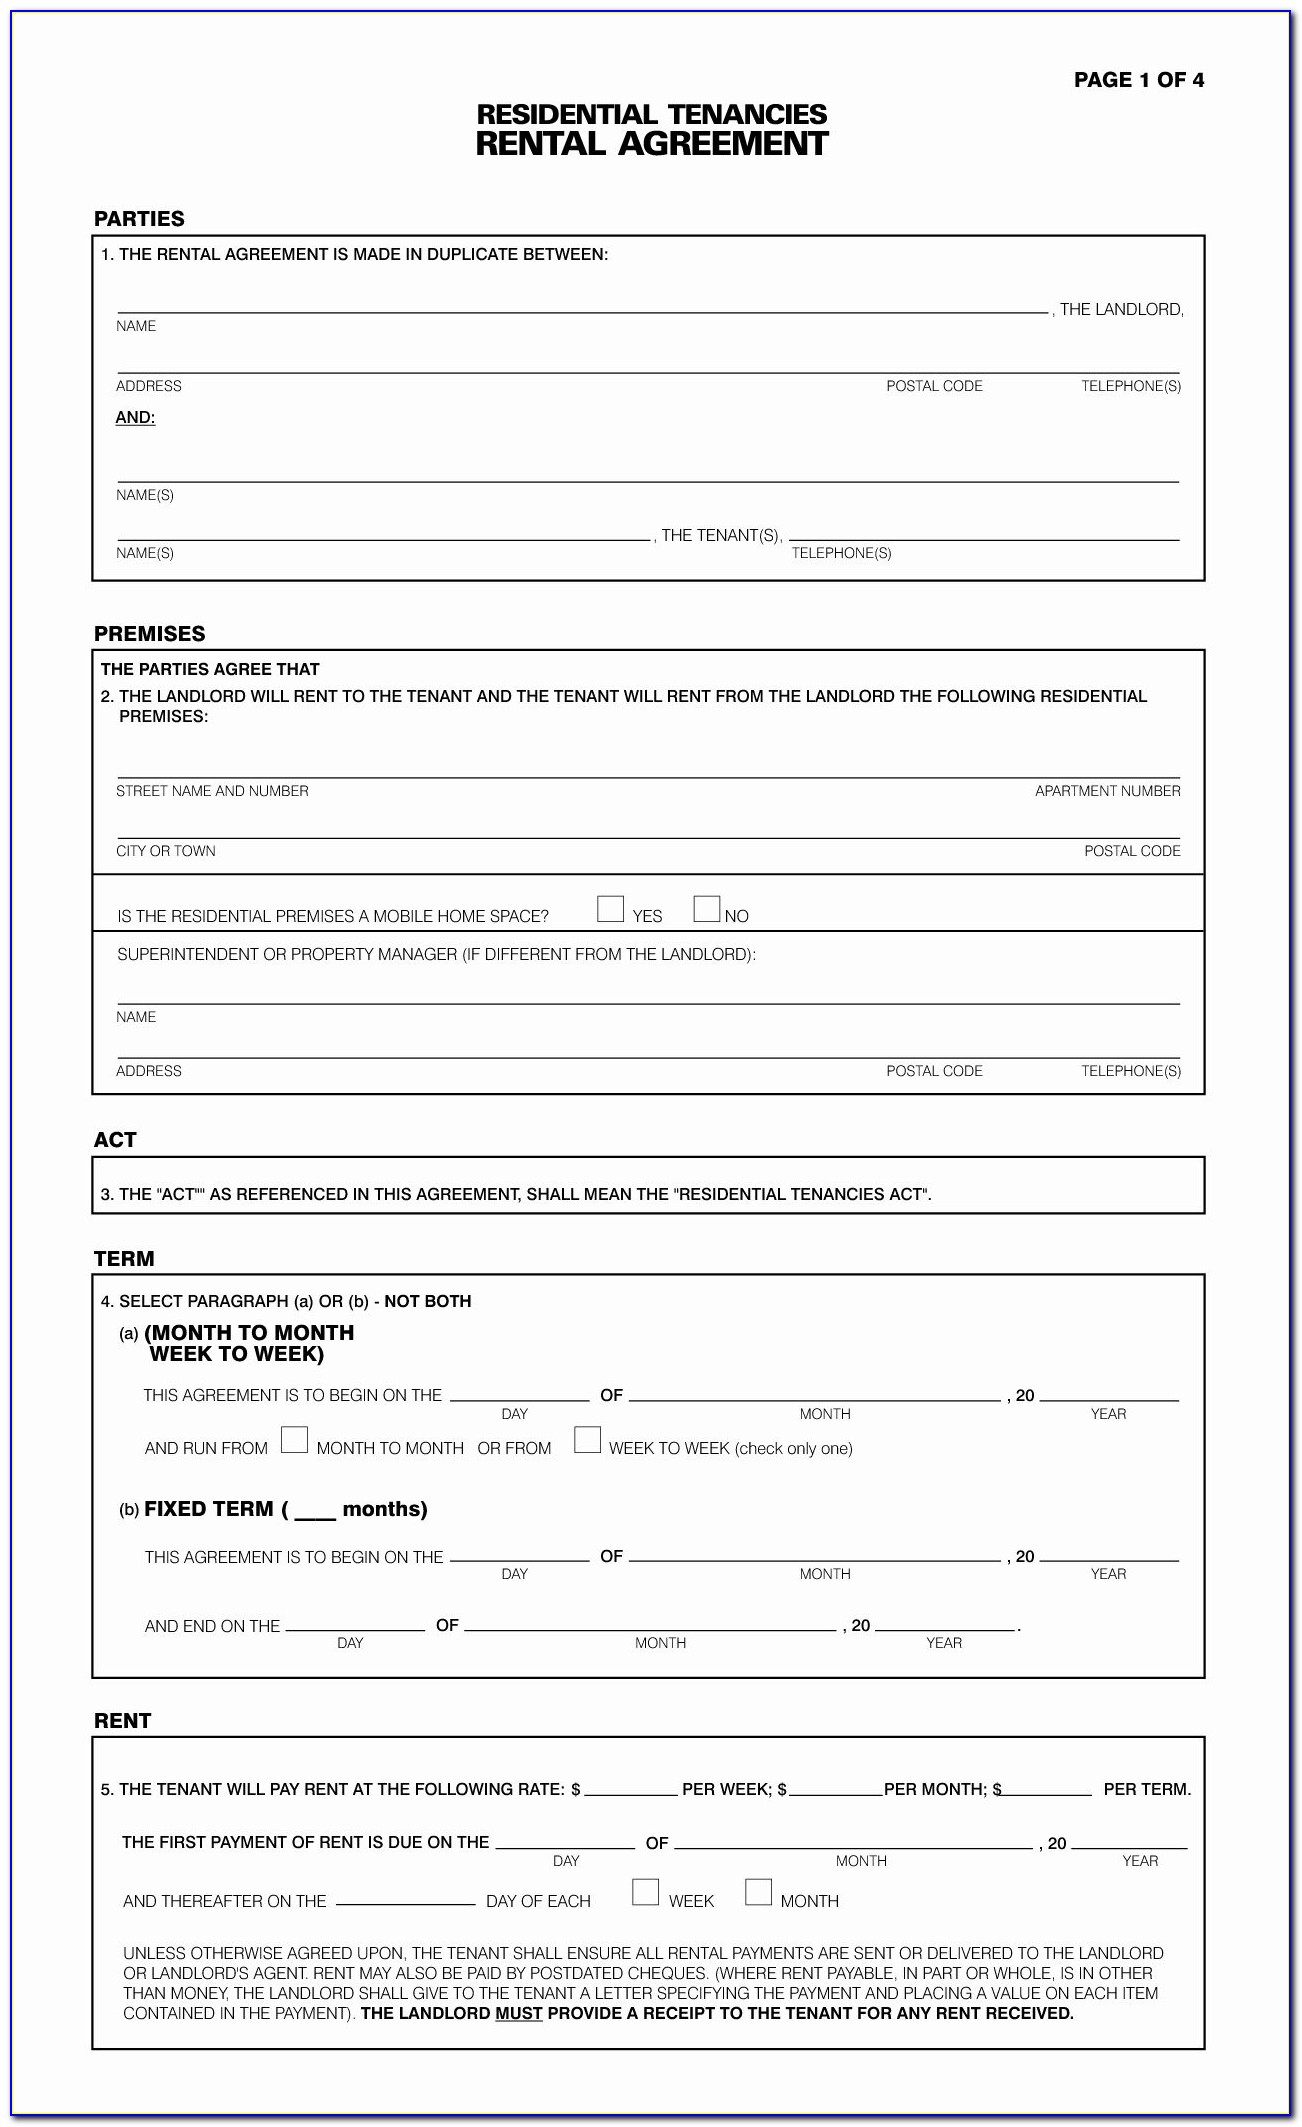 California Lease Agreement Form 2.1